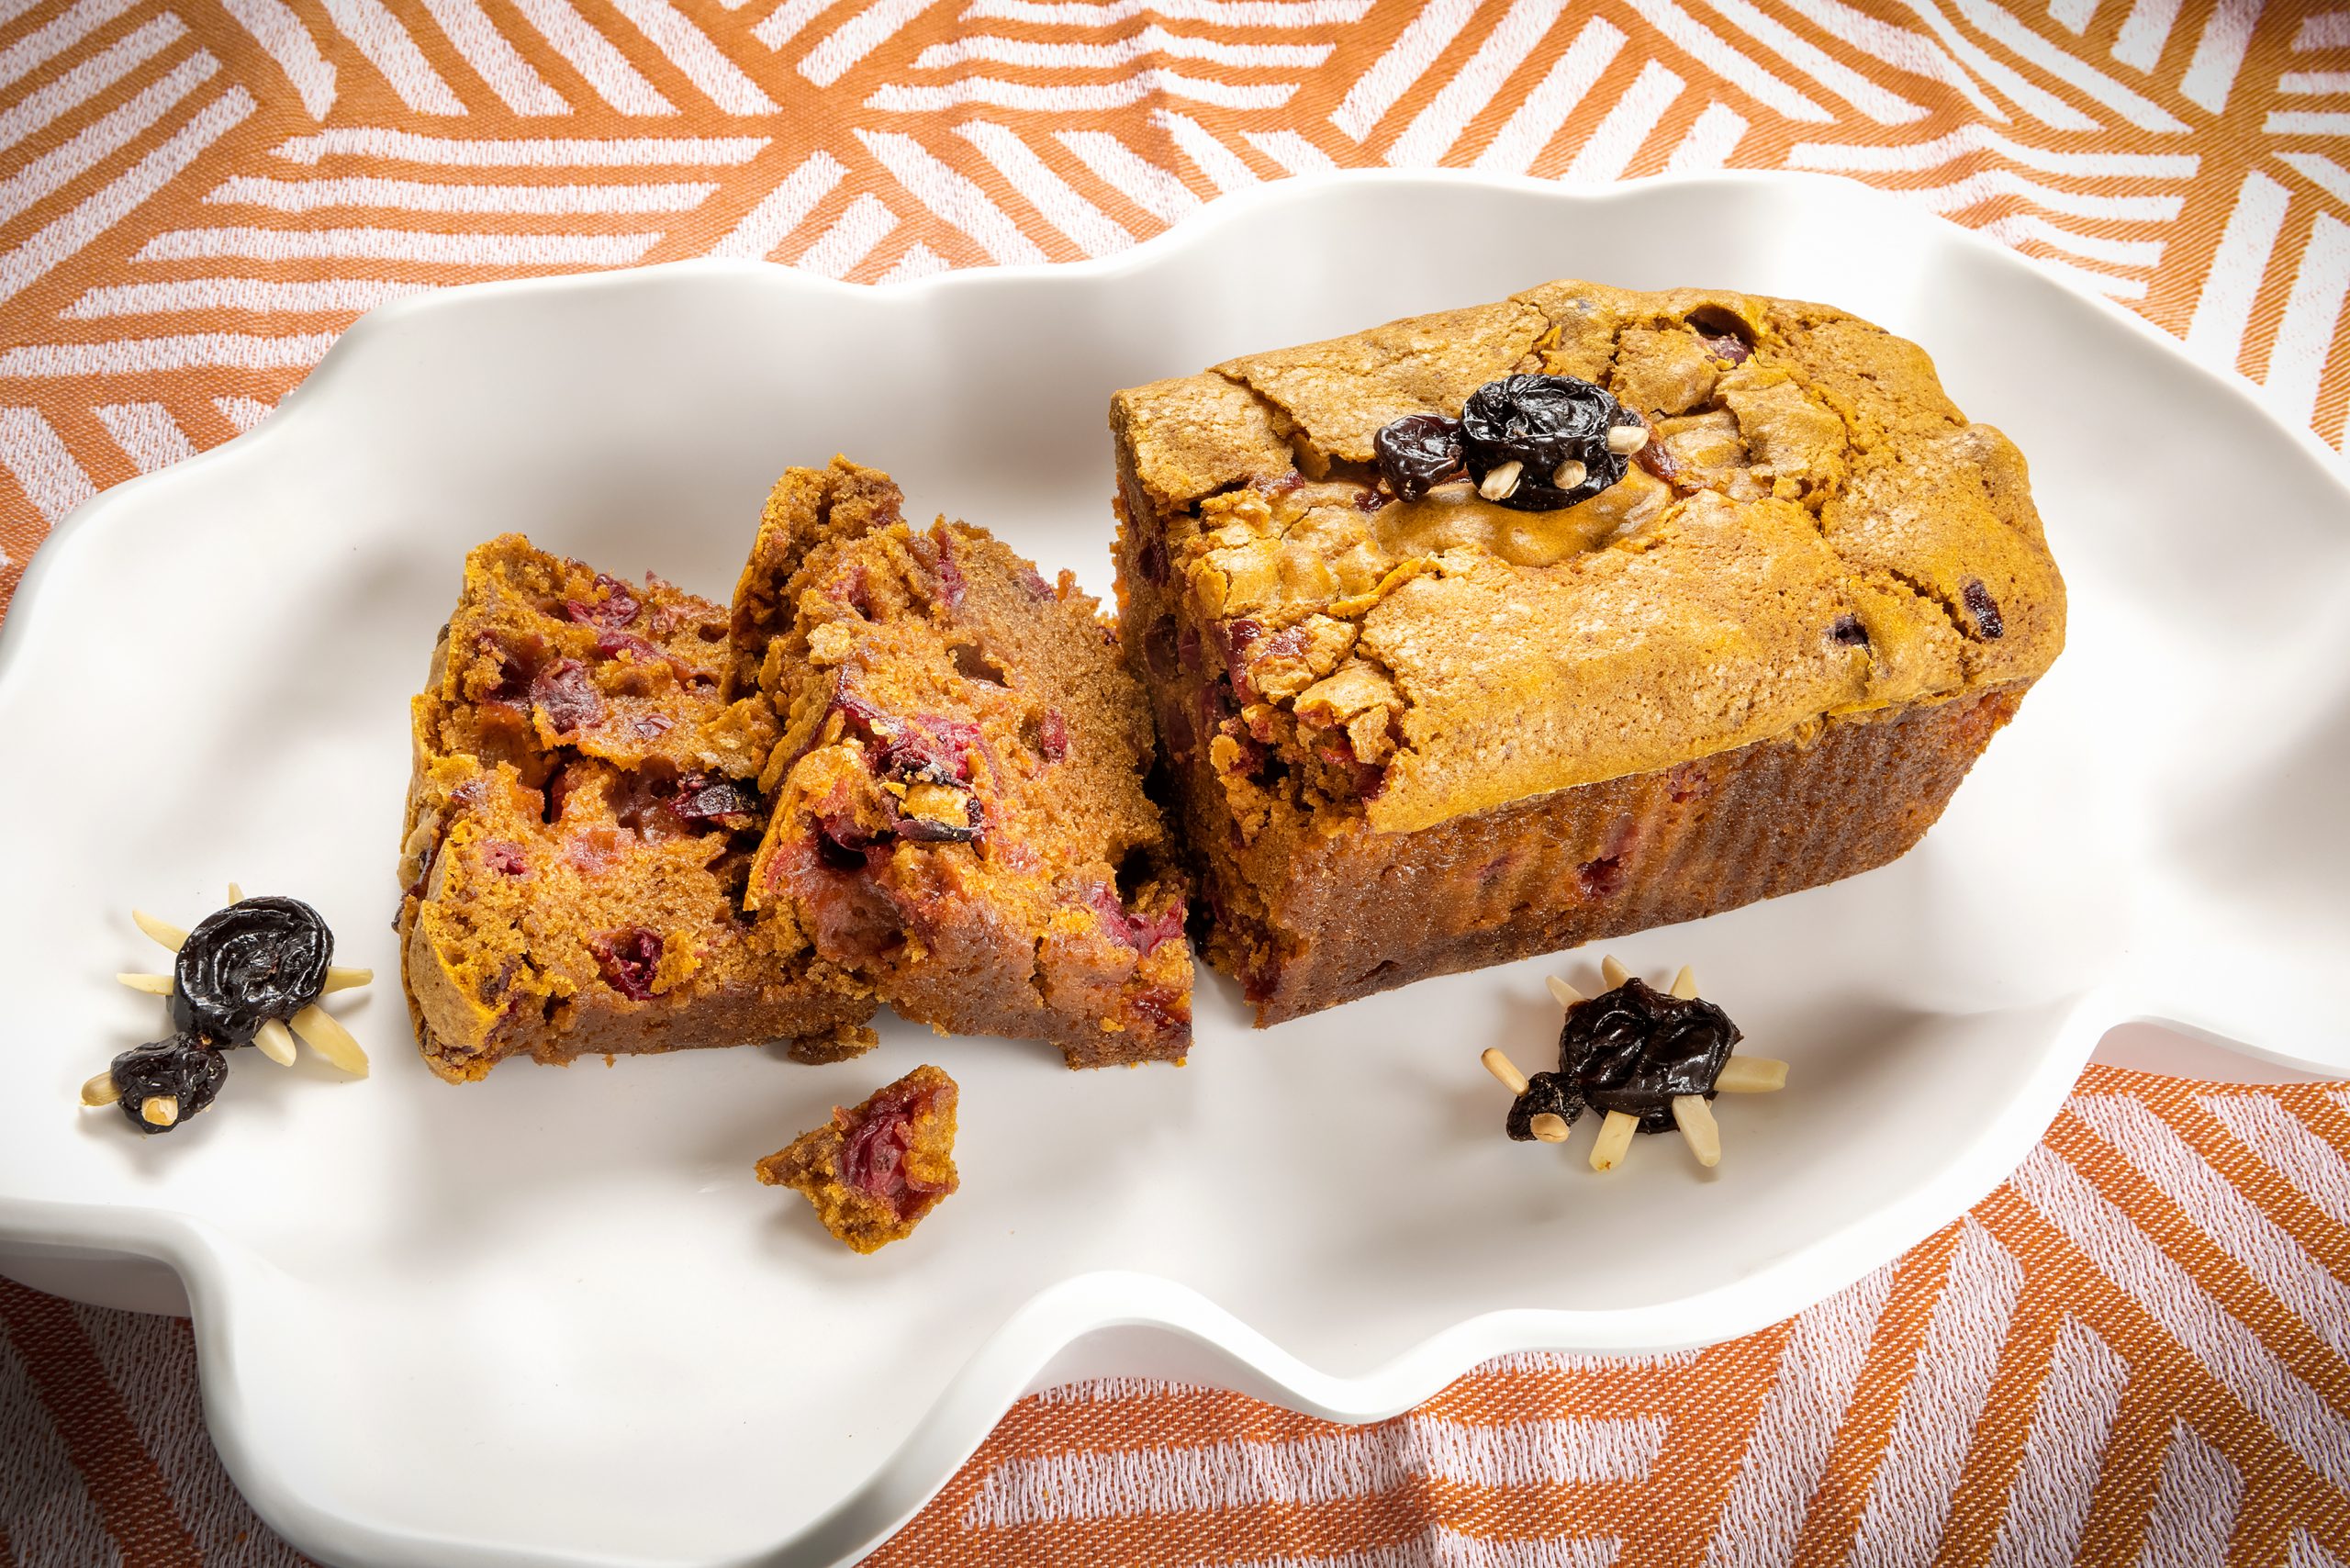 The tart and sweet pumpkin cranberry loaves are embellished with spiders made out of raisins and sliced almonds — this recipe is a family secret! Luxury Melamine dish by Beatriz Ball and Scents & Feel cloth, courtesy of Cottage & Vine.